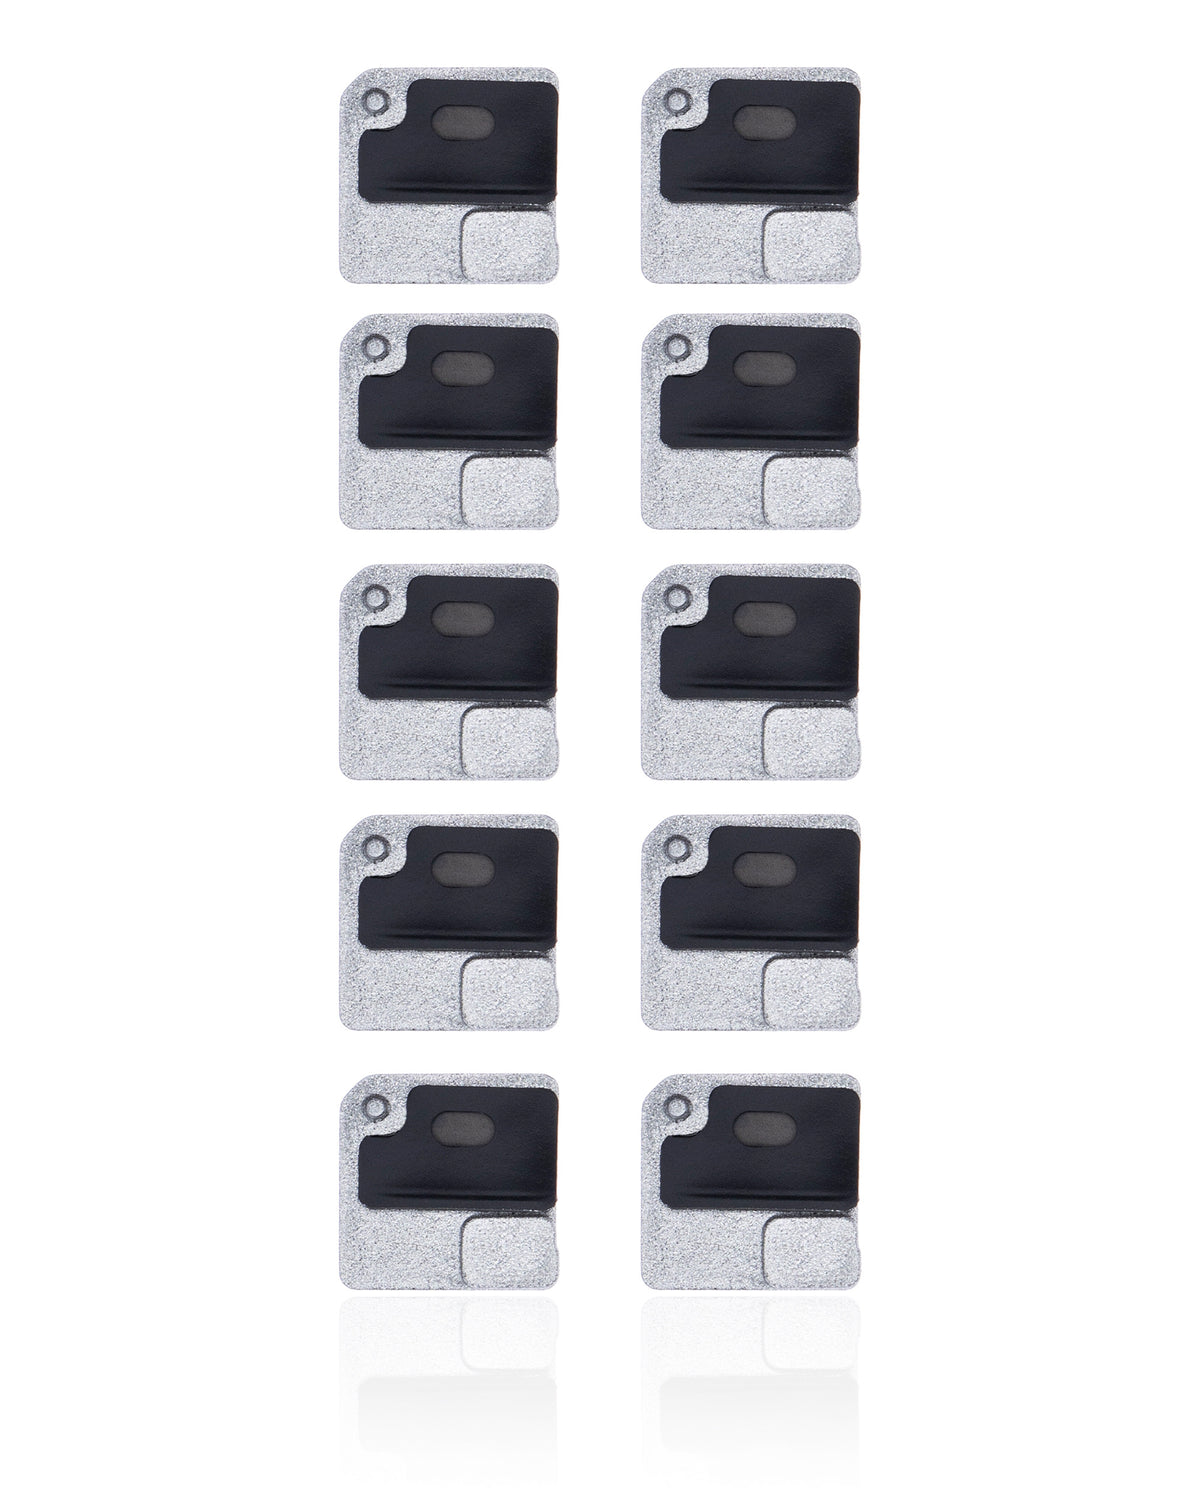 WHITE - FLASH LIGHT / POWER FLEX BRACKET WITH MICROPHONE MESH FOR IPHONE 12 (10 PACK)